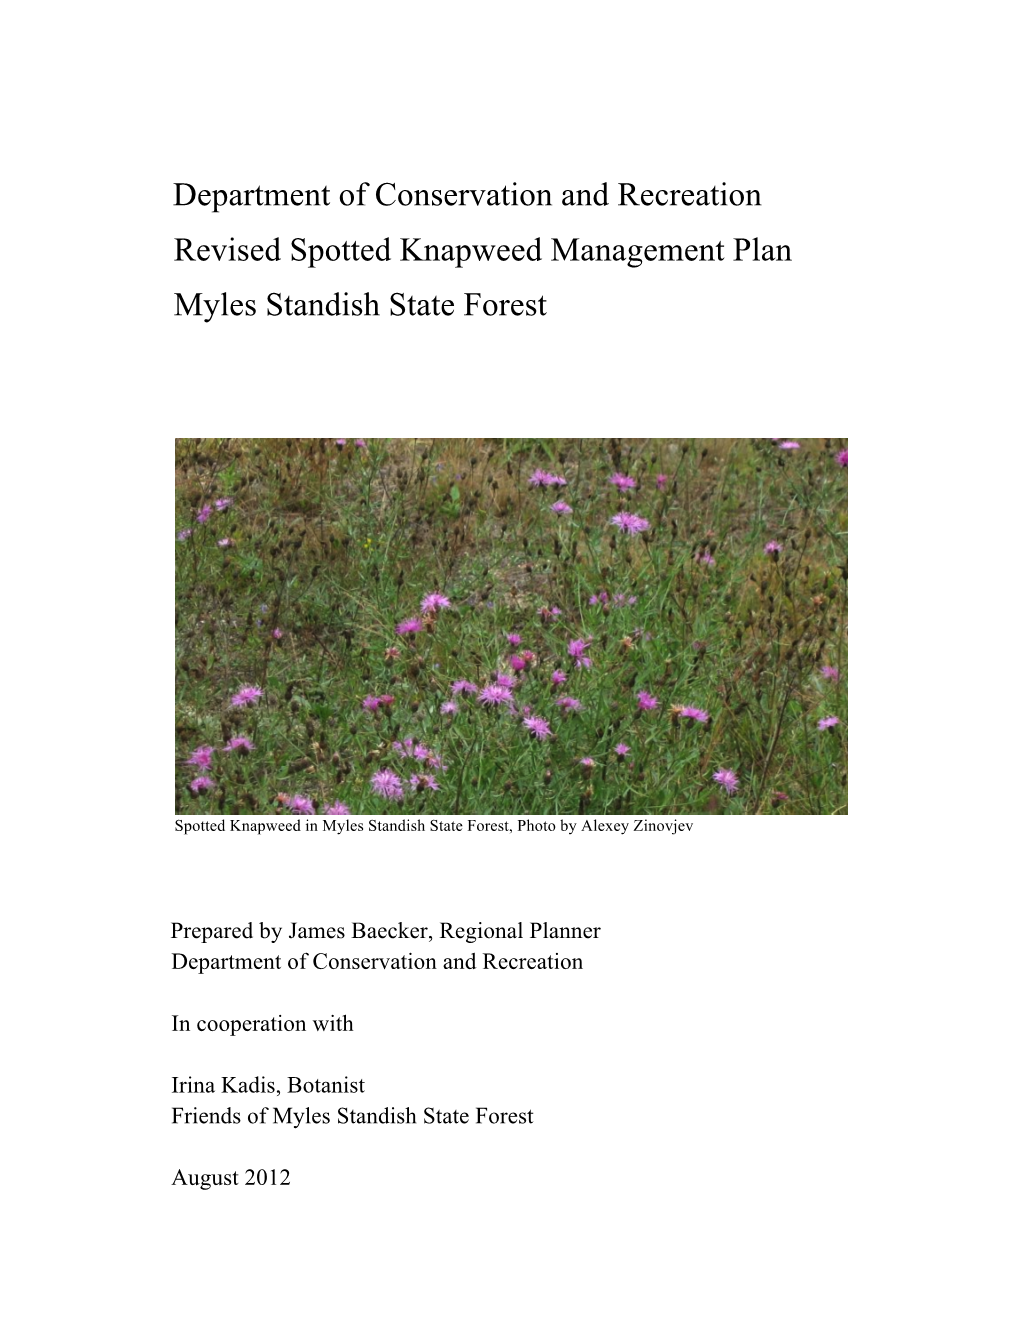 Department of Conservation and Recreation Revised Spotted Knapweed Management Plan Myles Standish State Forest